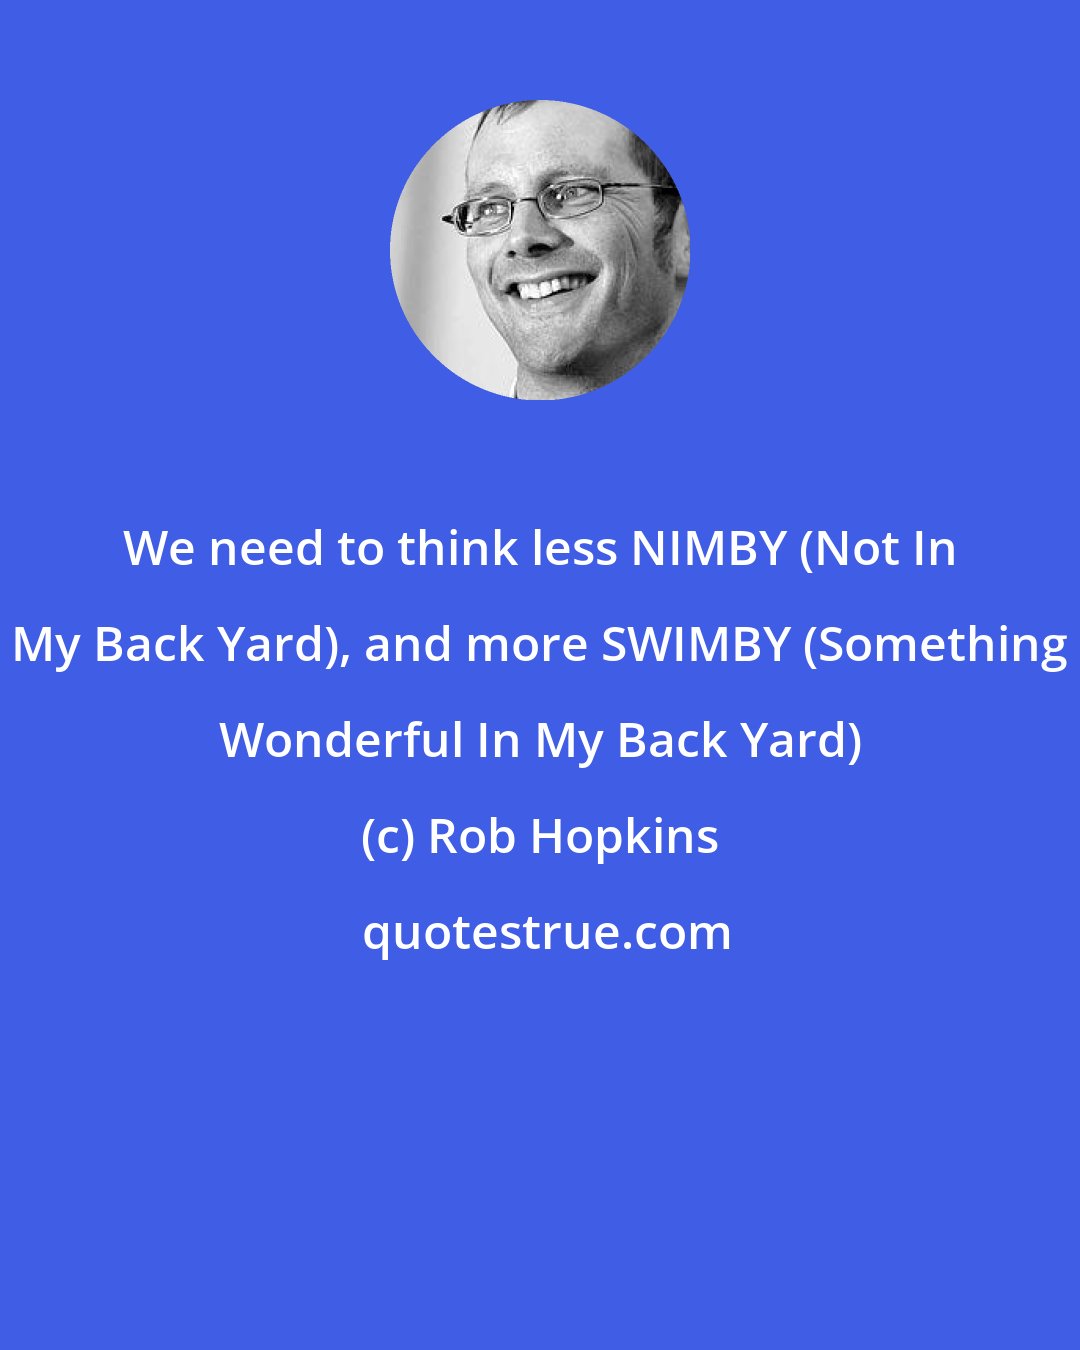 Rob Hopkins: We need to think less NIMBY (Not In My Back Yard), and more SWIMBY (Something Wonderful In My Back Yard)